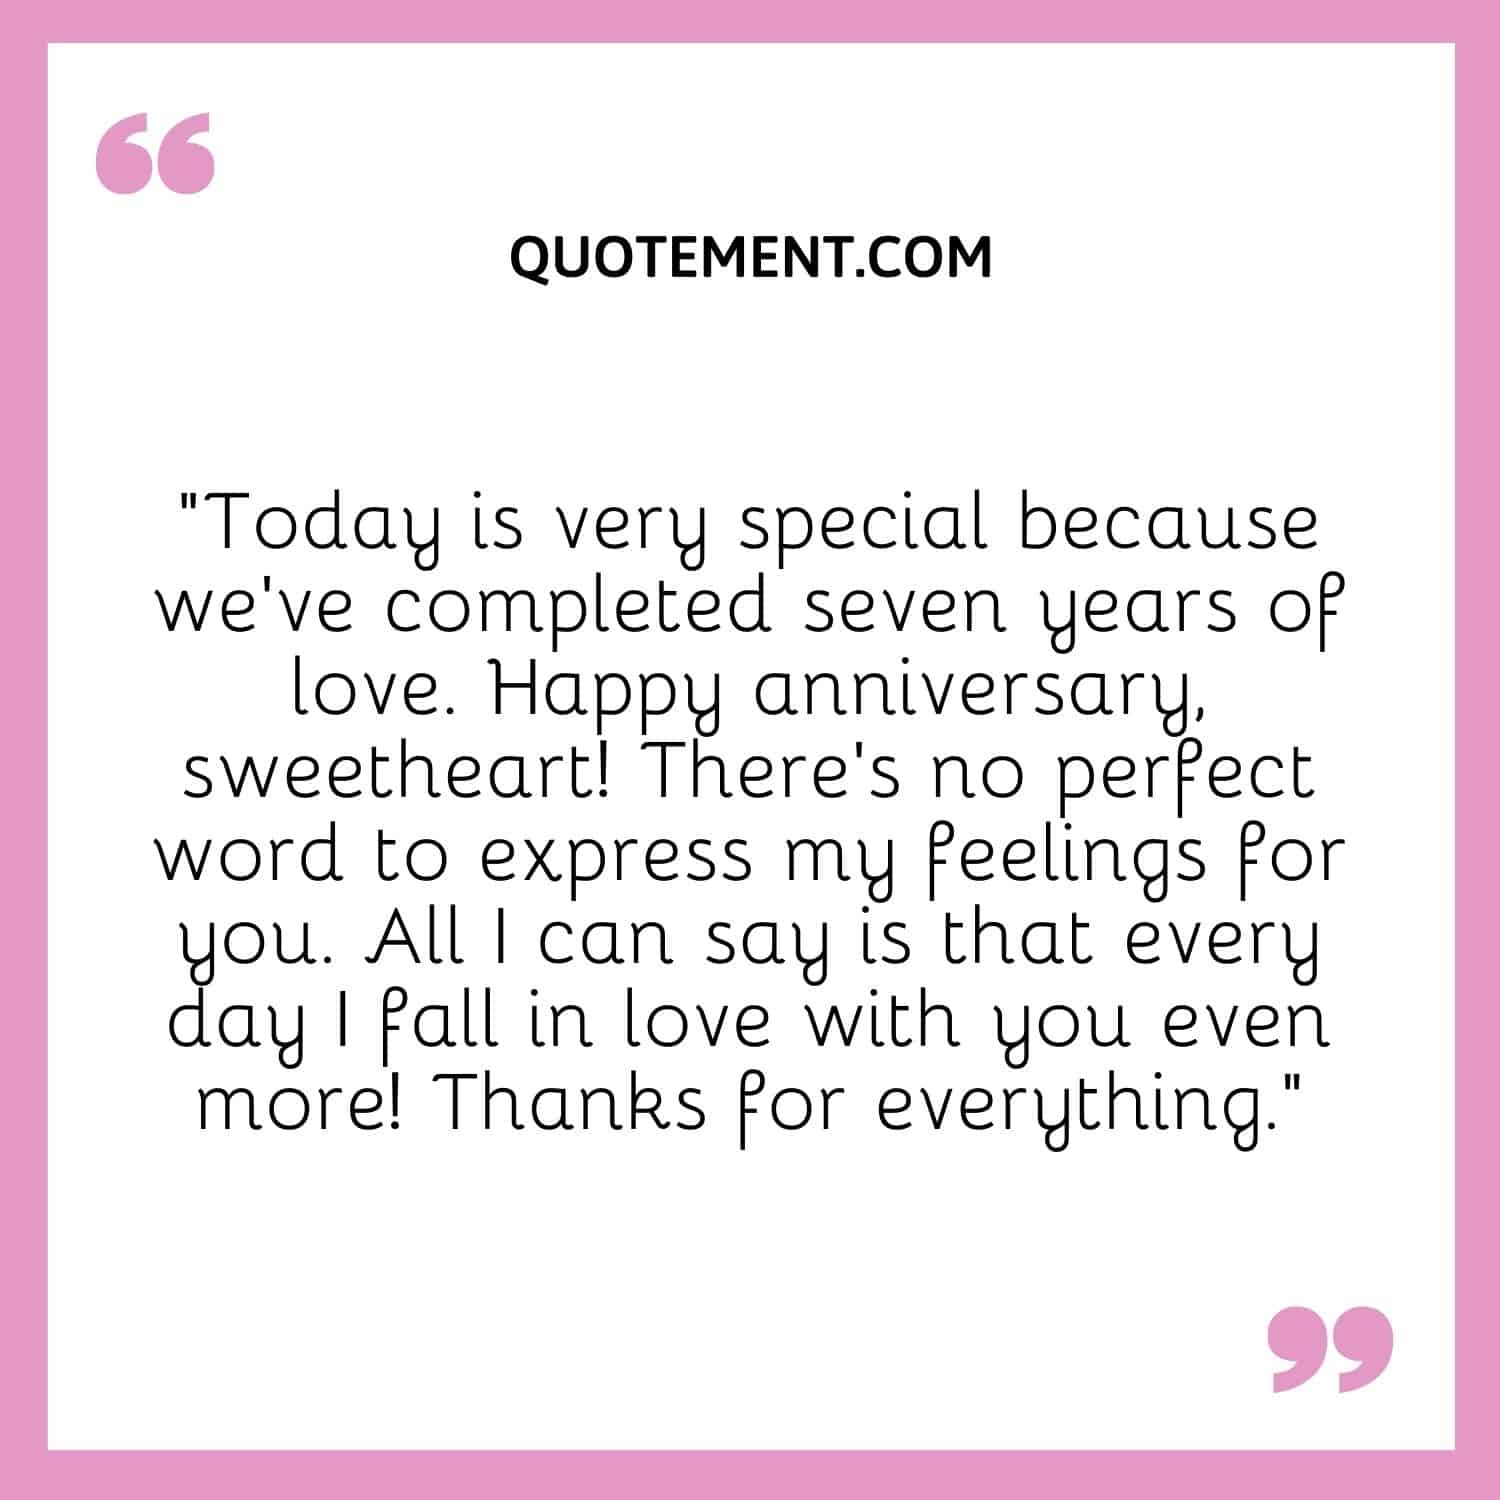 Today is very special because we’ve completed seven years of love.